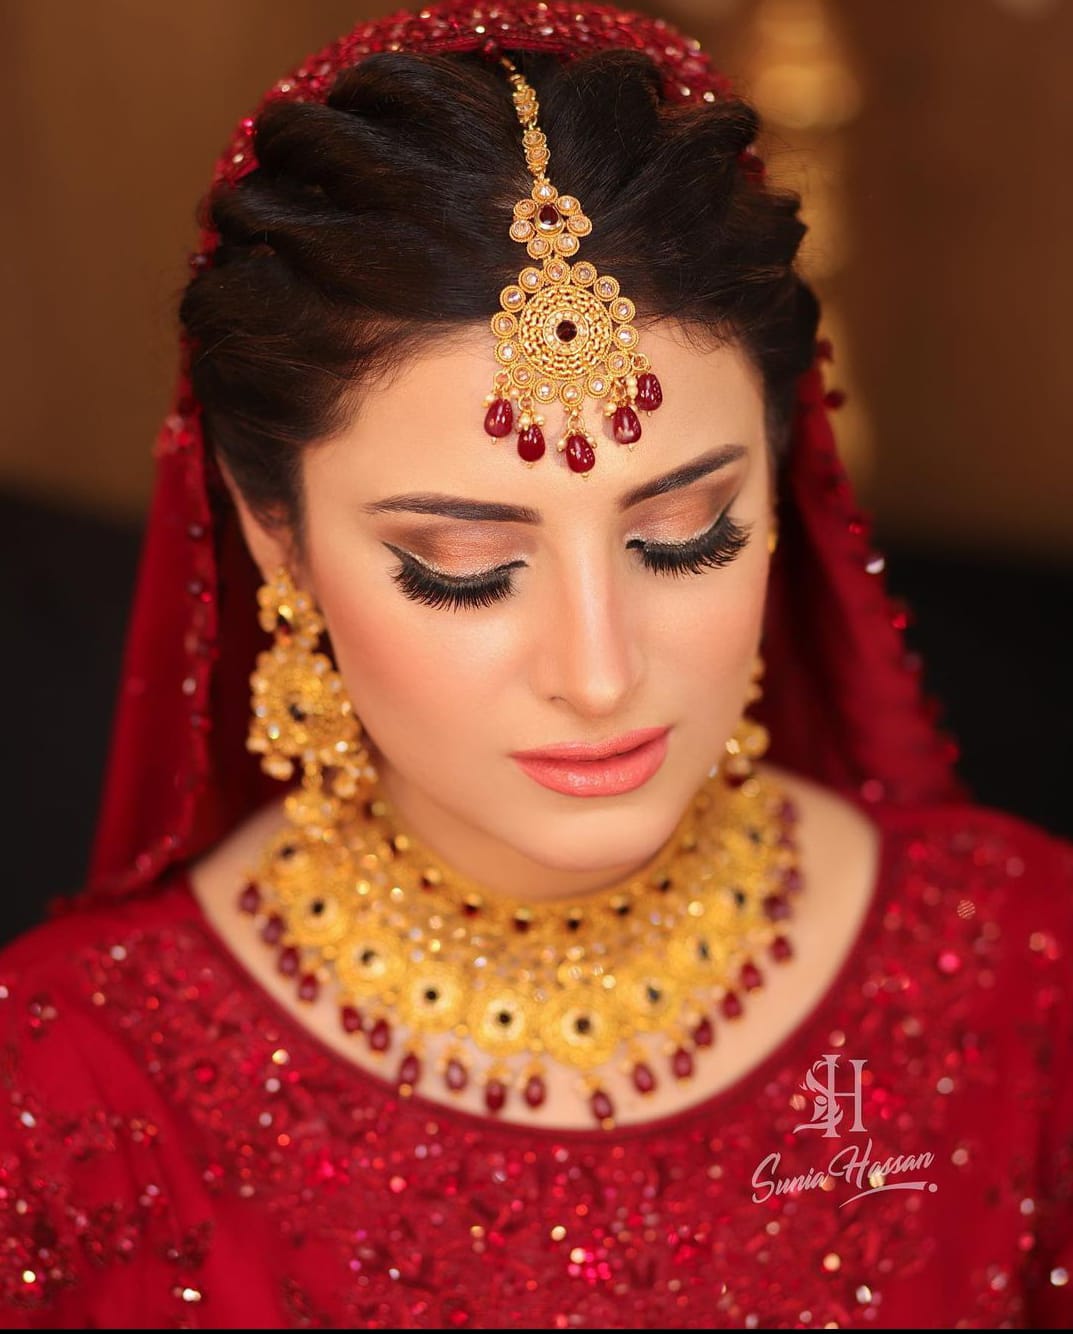 5 tips to help you nail a minimal makeup look for an at-home wedding |  Vogue India